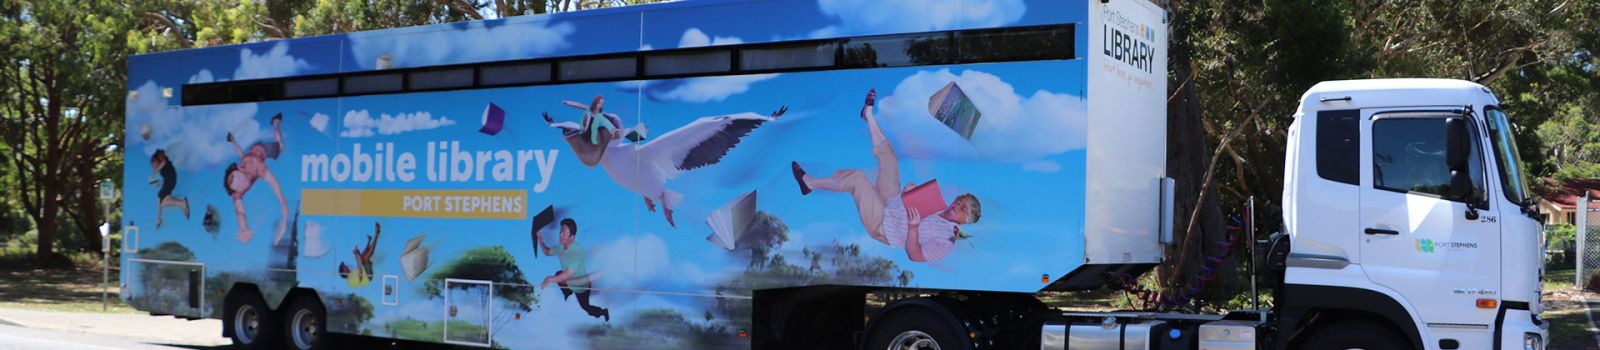 Image of the mobile library truck  banner image